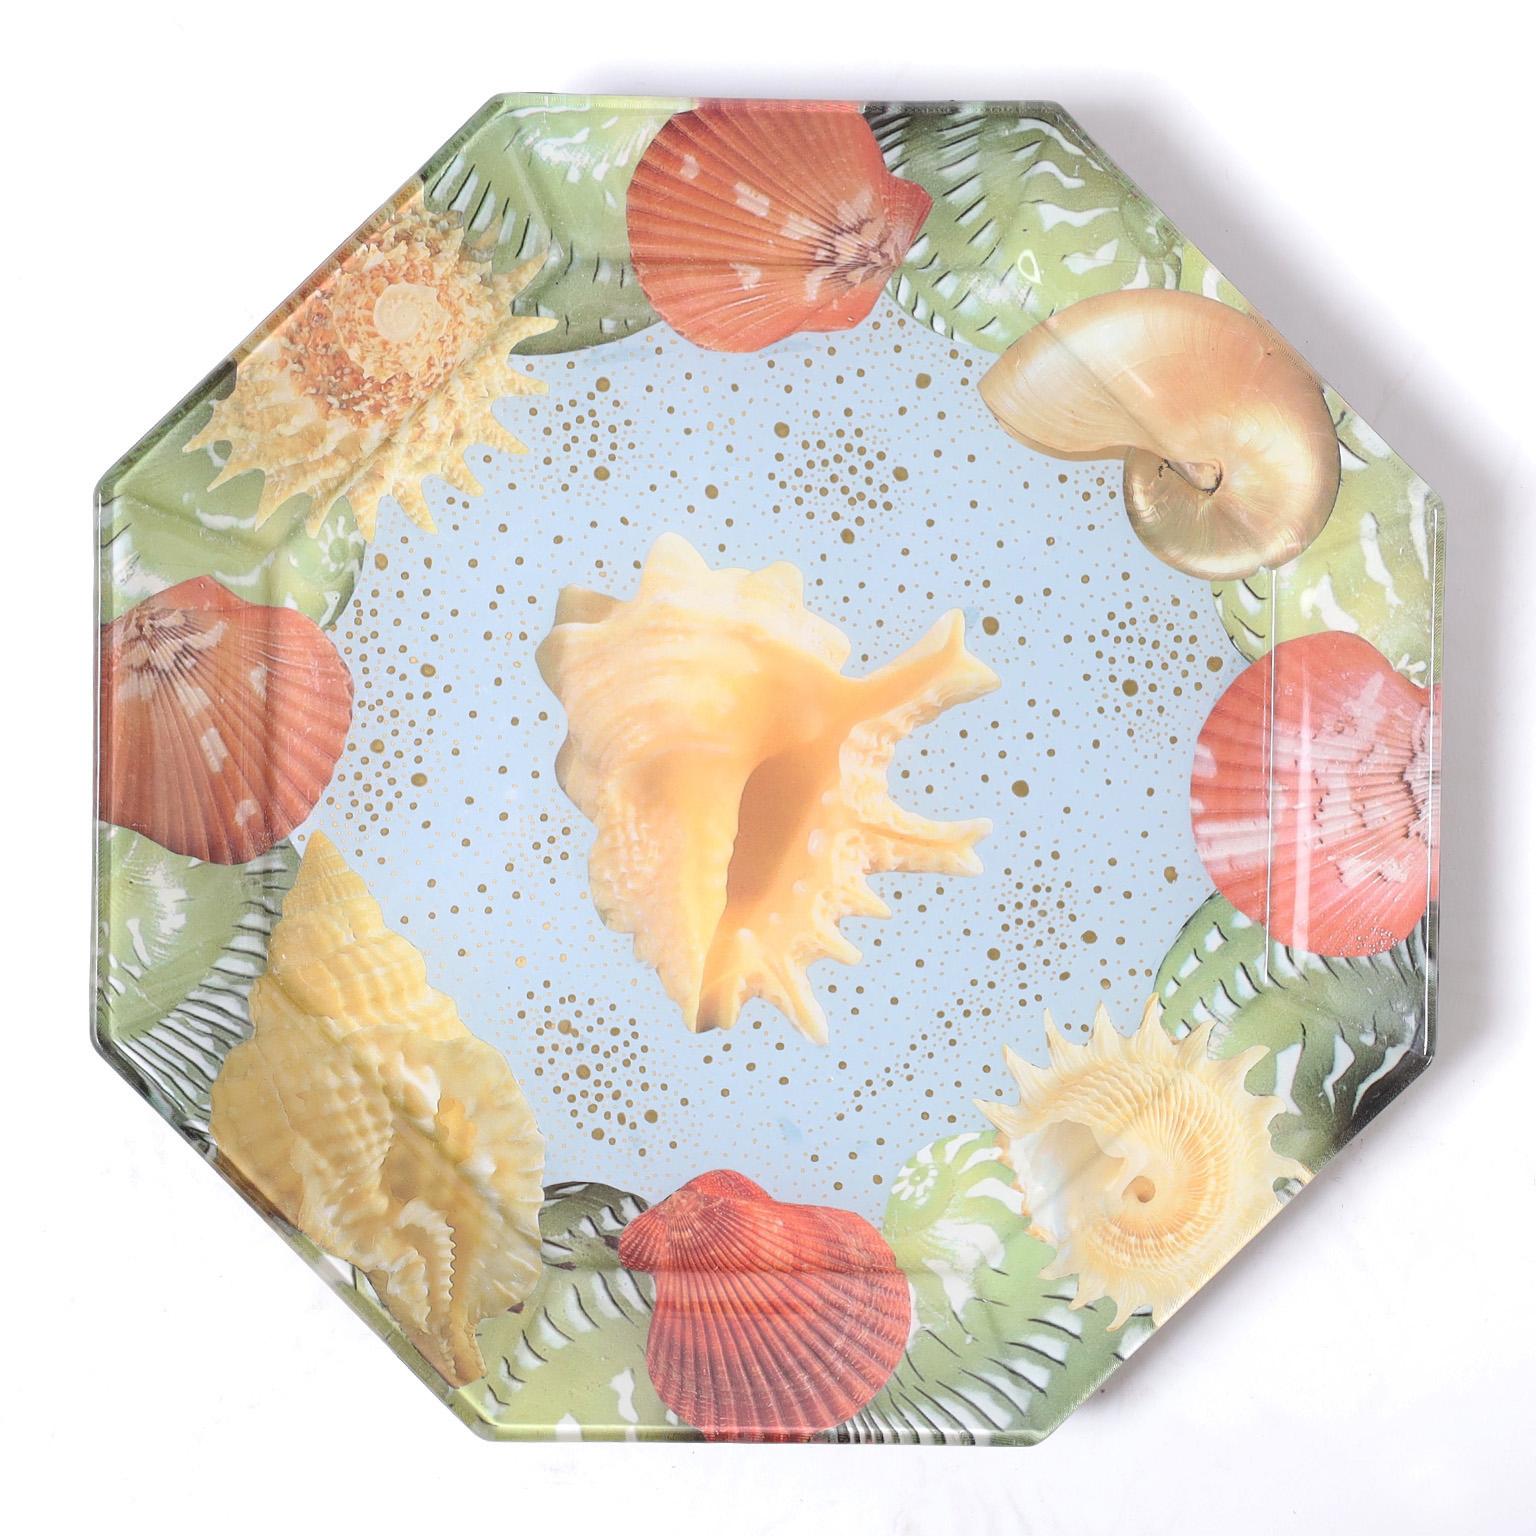 Set of Ten Reverse Decoupage Seashell Glass Plates by Pablo Manzoni In Good Condition For Sale In Palm Beach, FL